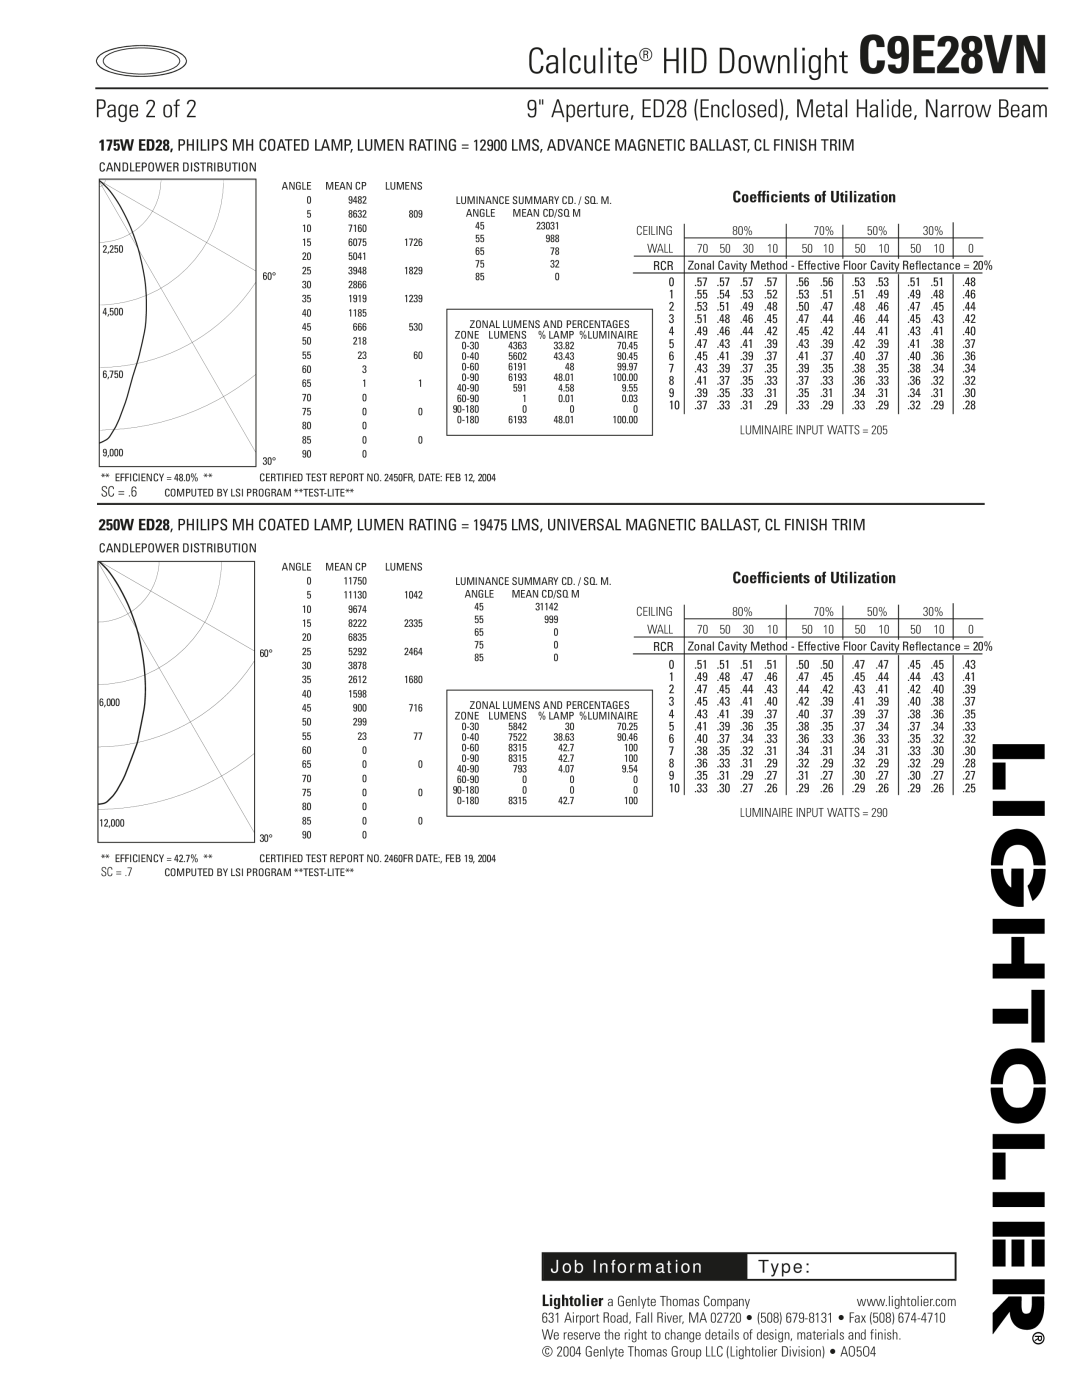 Lightolier specifications Calculite HID Downlight C9E28VN, Page 2 of, Job Information, Type 